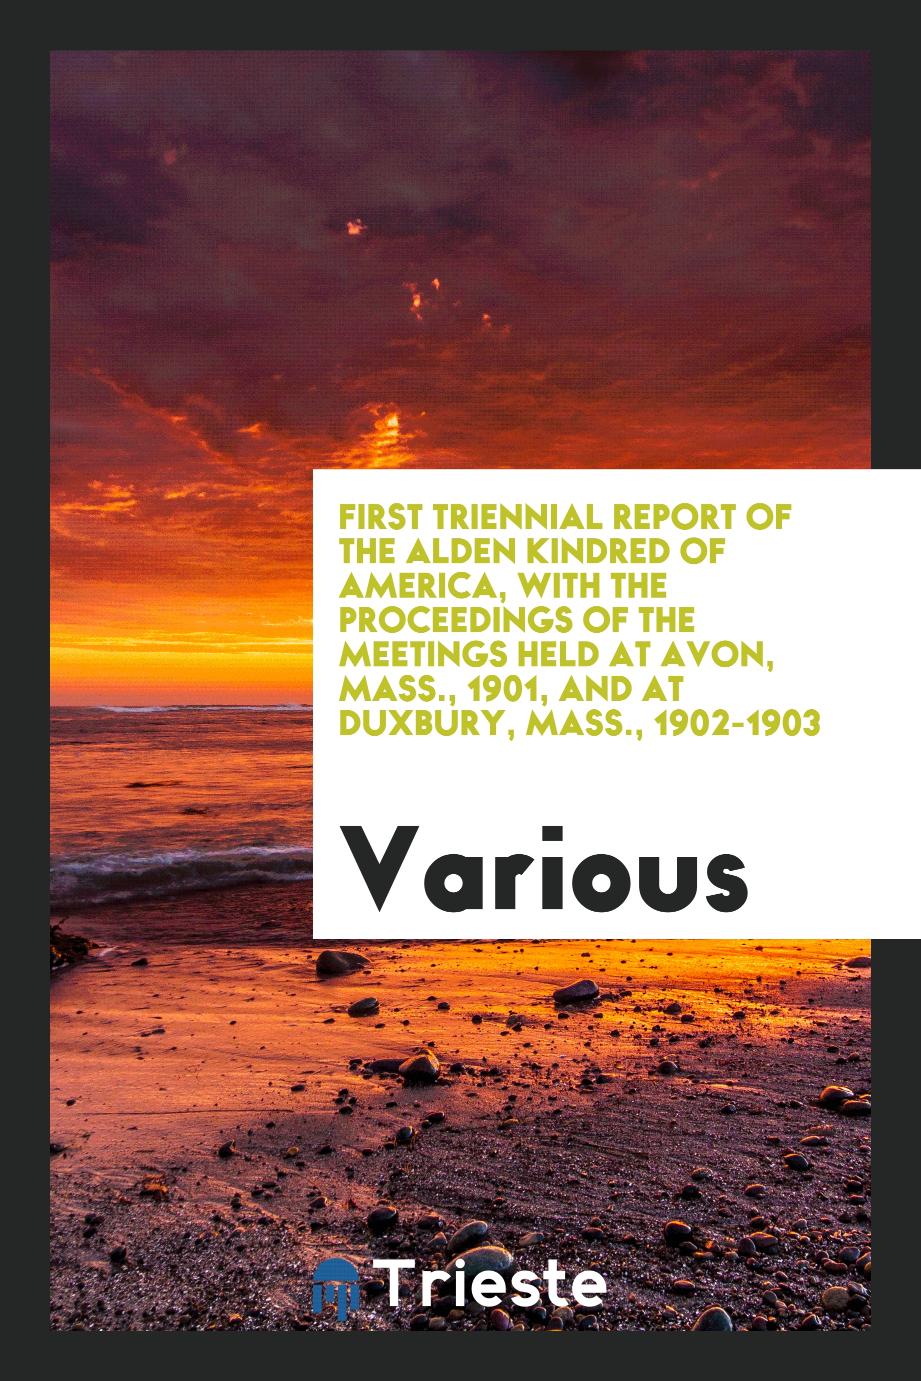 First Triennial Report of the Alden Kindred of America, with the Proceedings of the Meetings Held at Avon, Mass., 1901, and at duxbury, Mass., 1902-1903